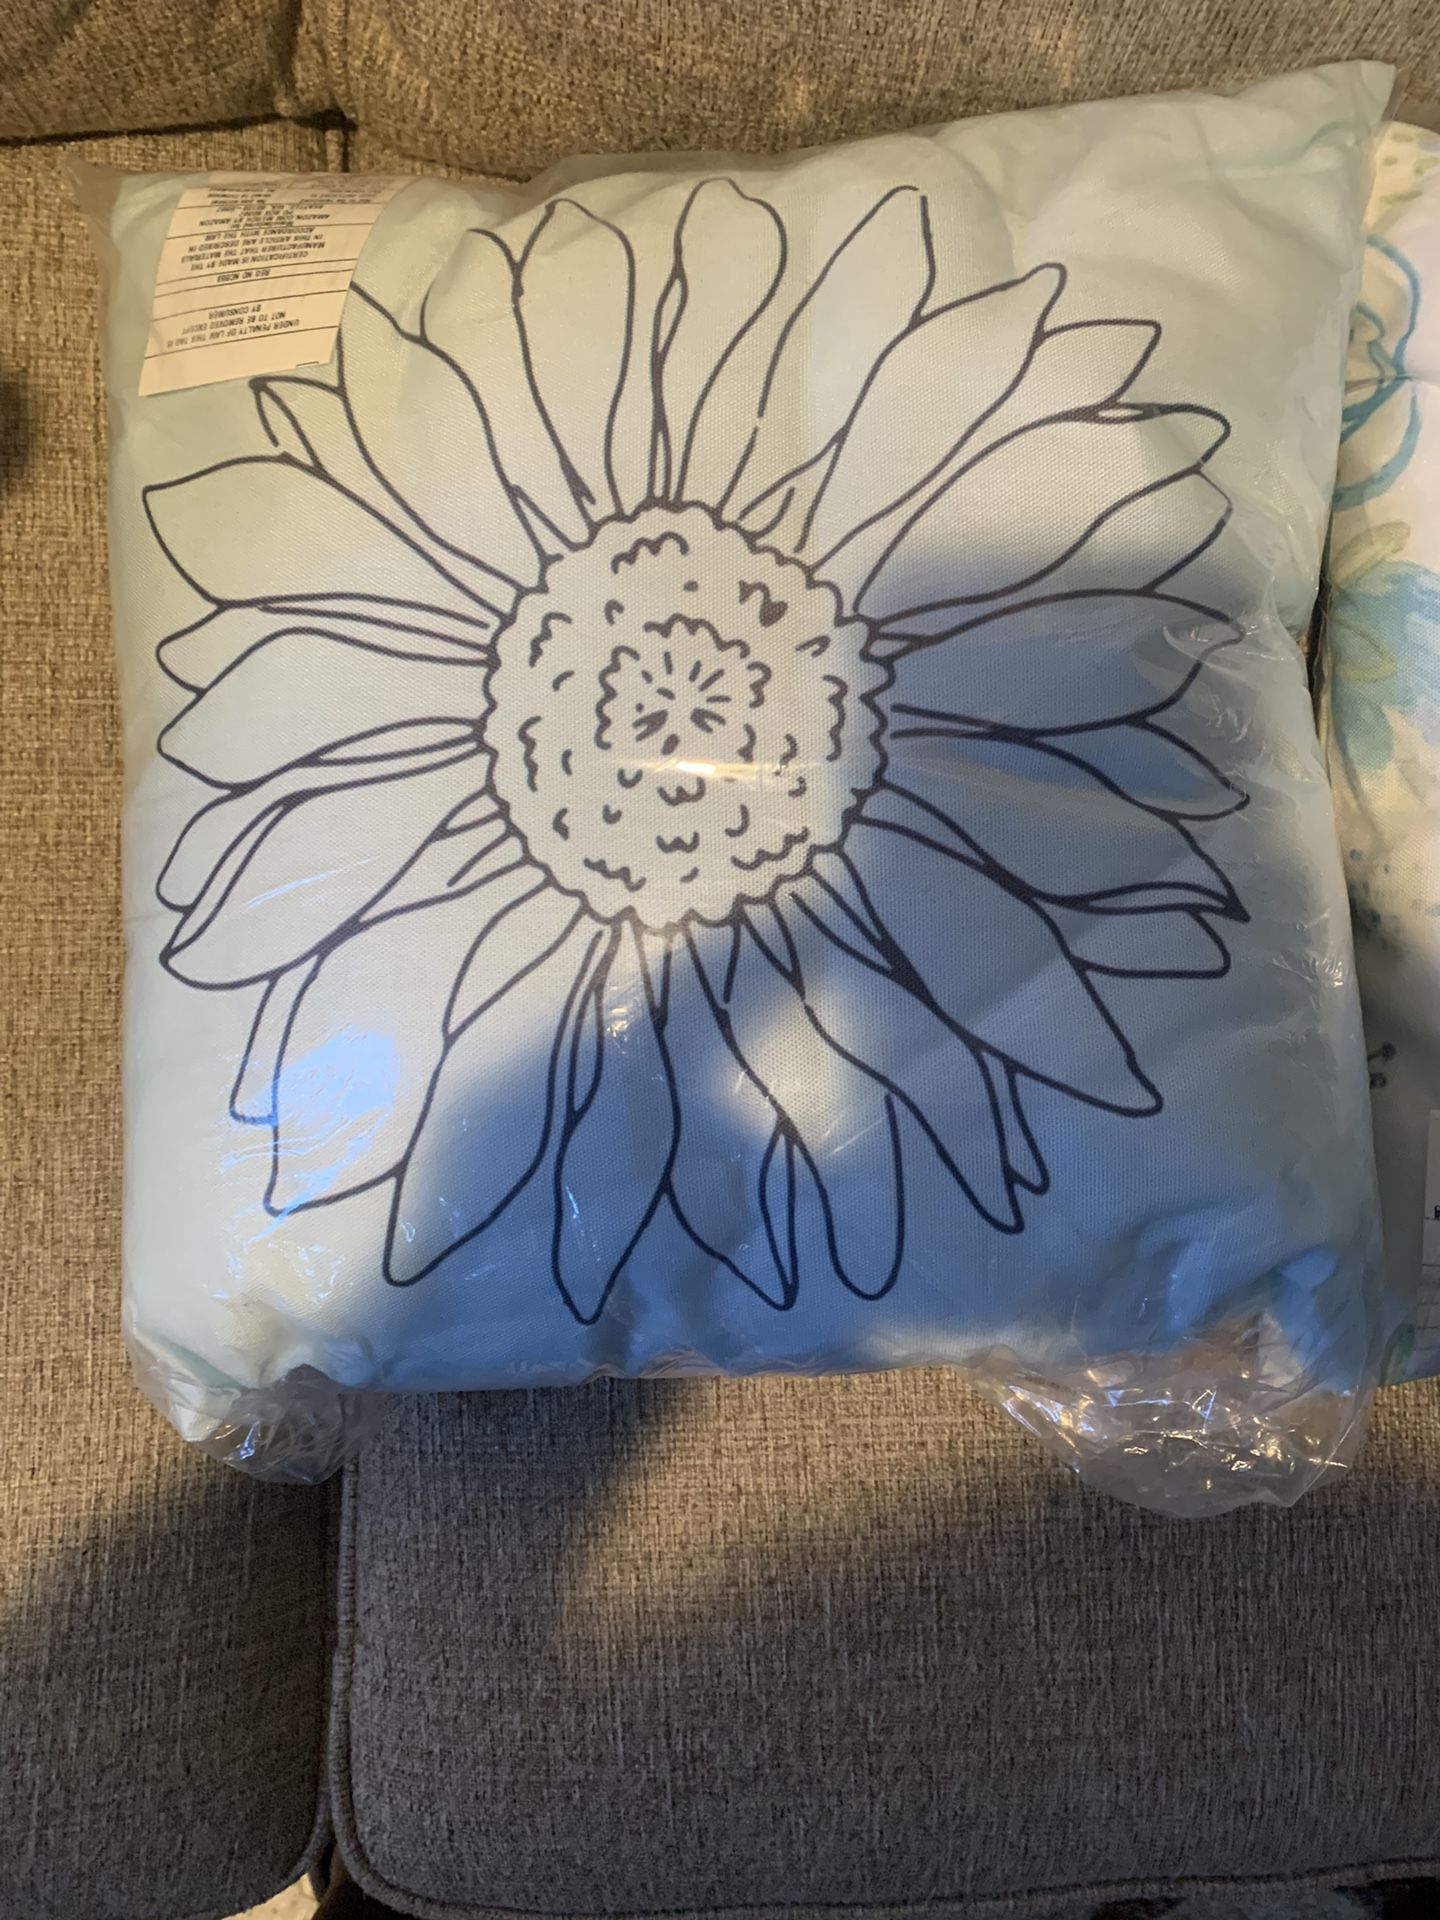 Decorative pillow A-45 for Sale in North Las Vegas, NV - OfferUp